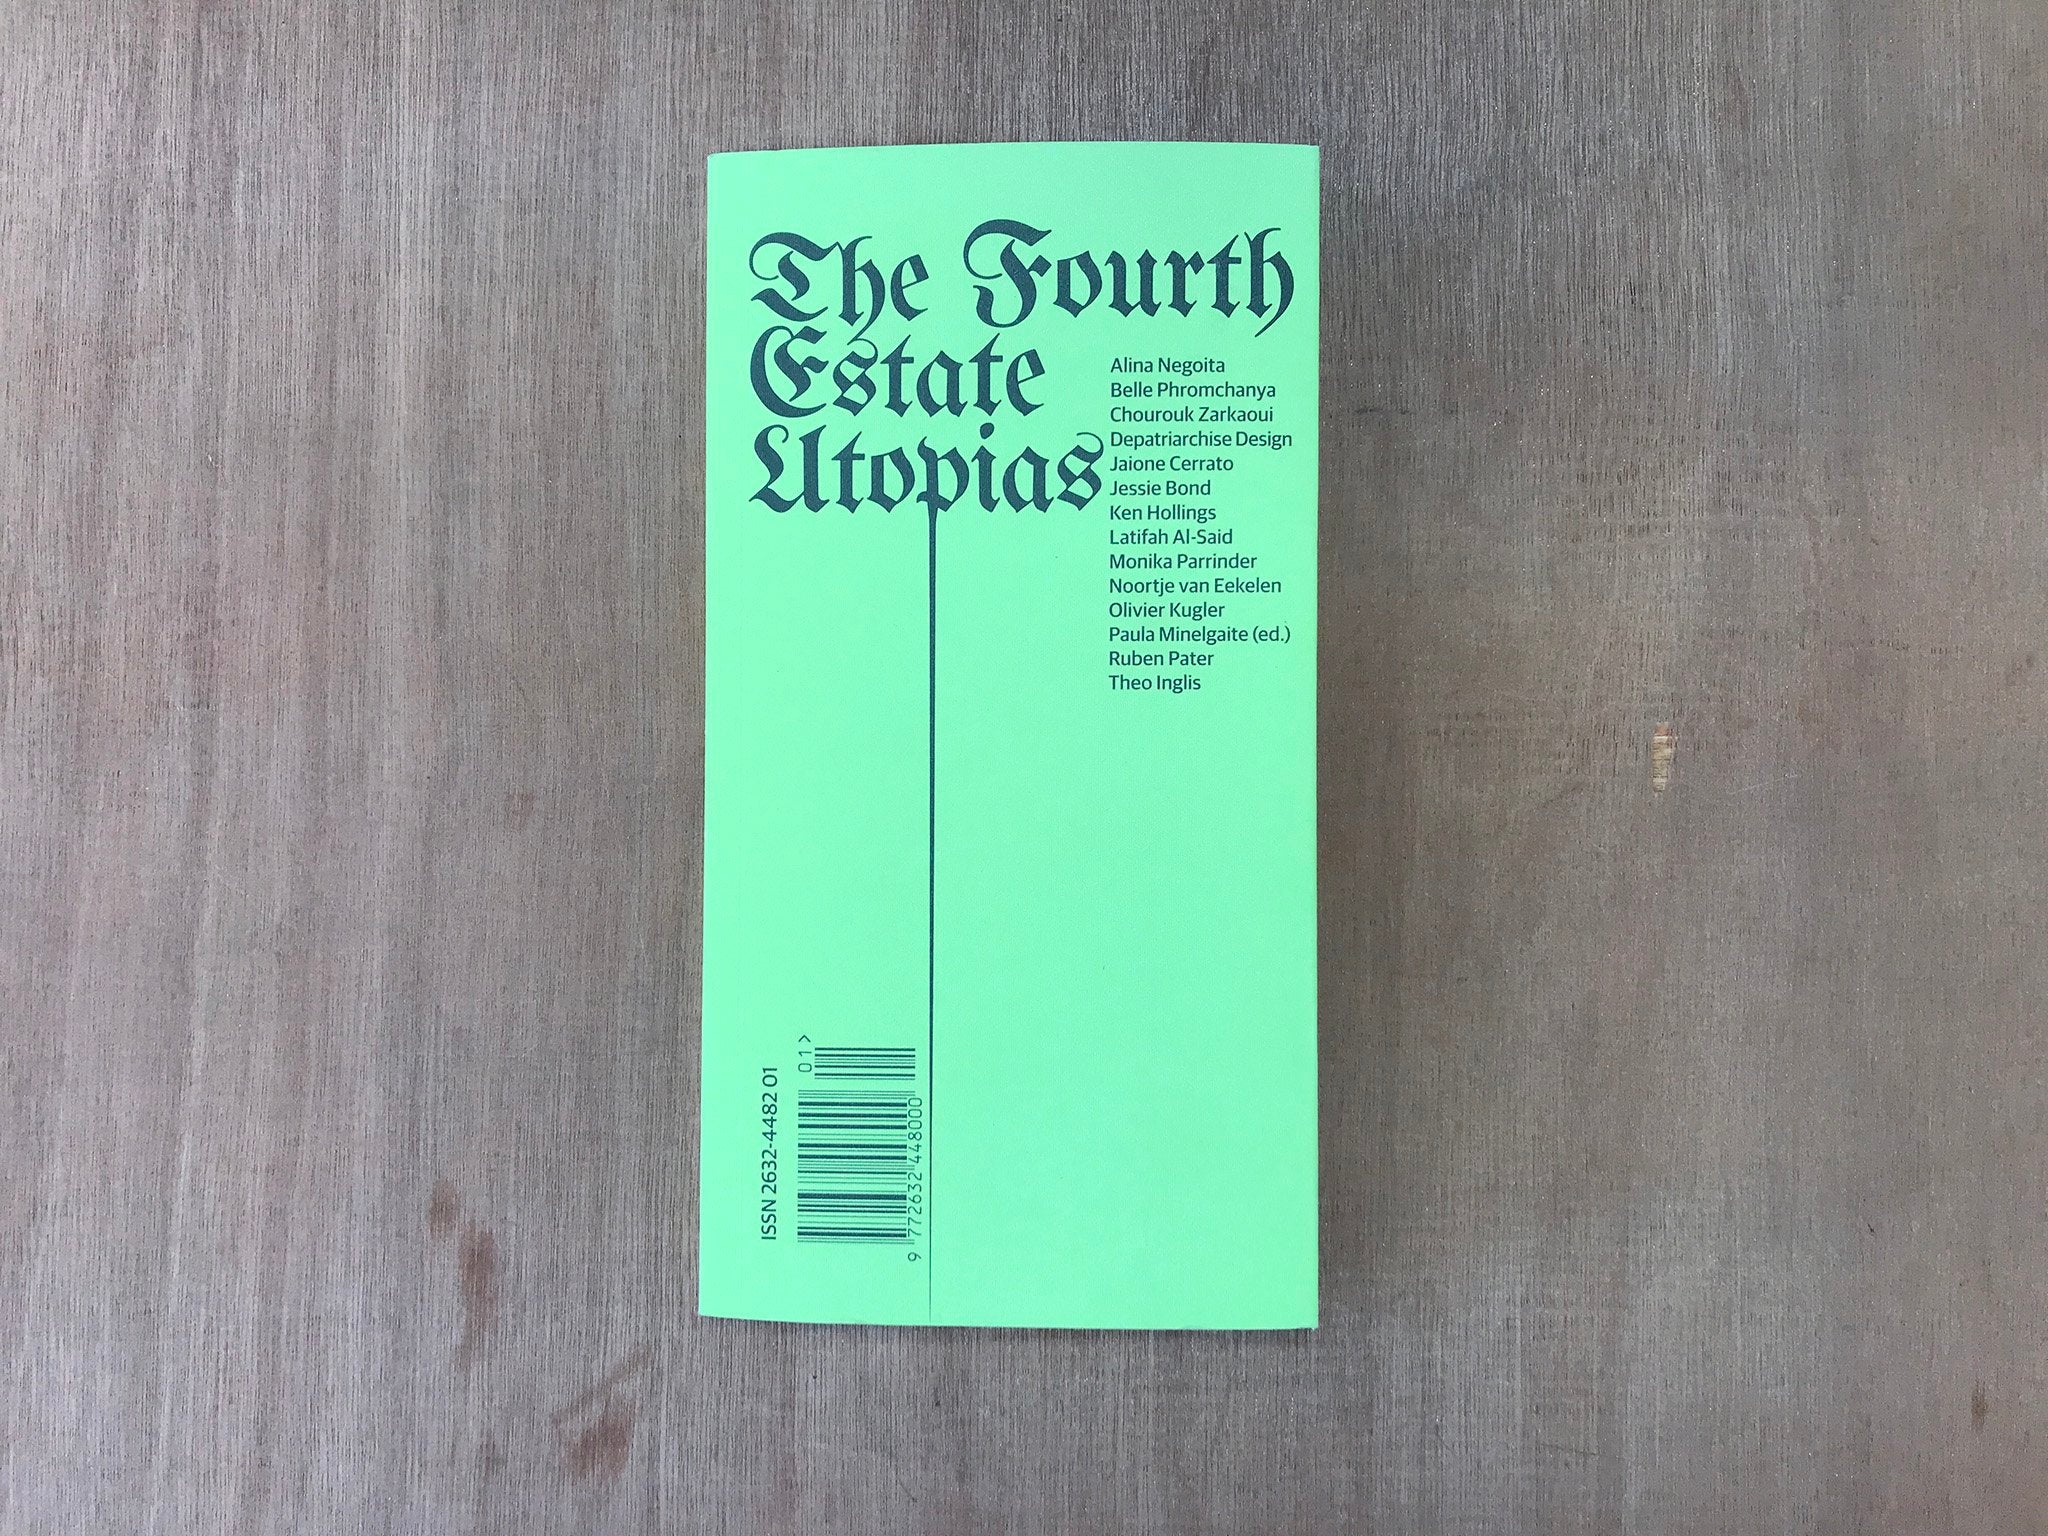 THE FOURTH ESTATE UTOPIAS by Various Artists